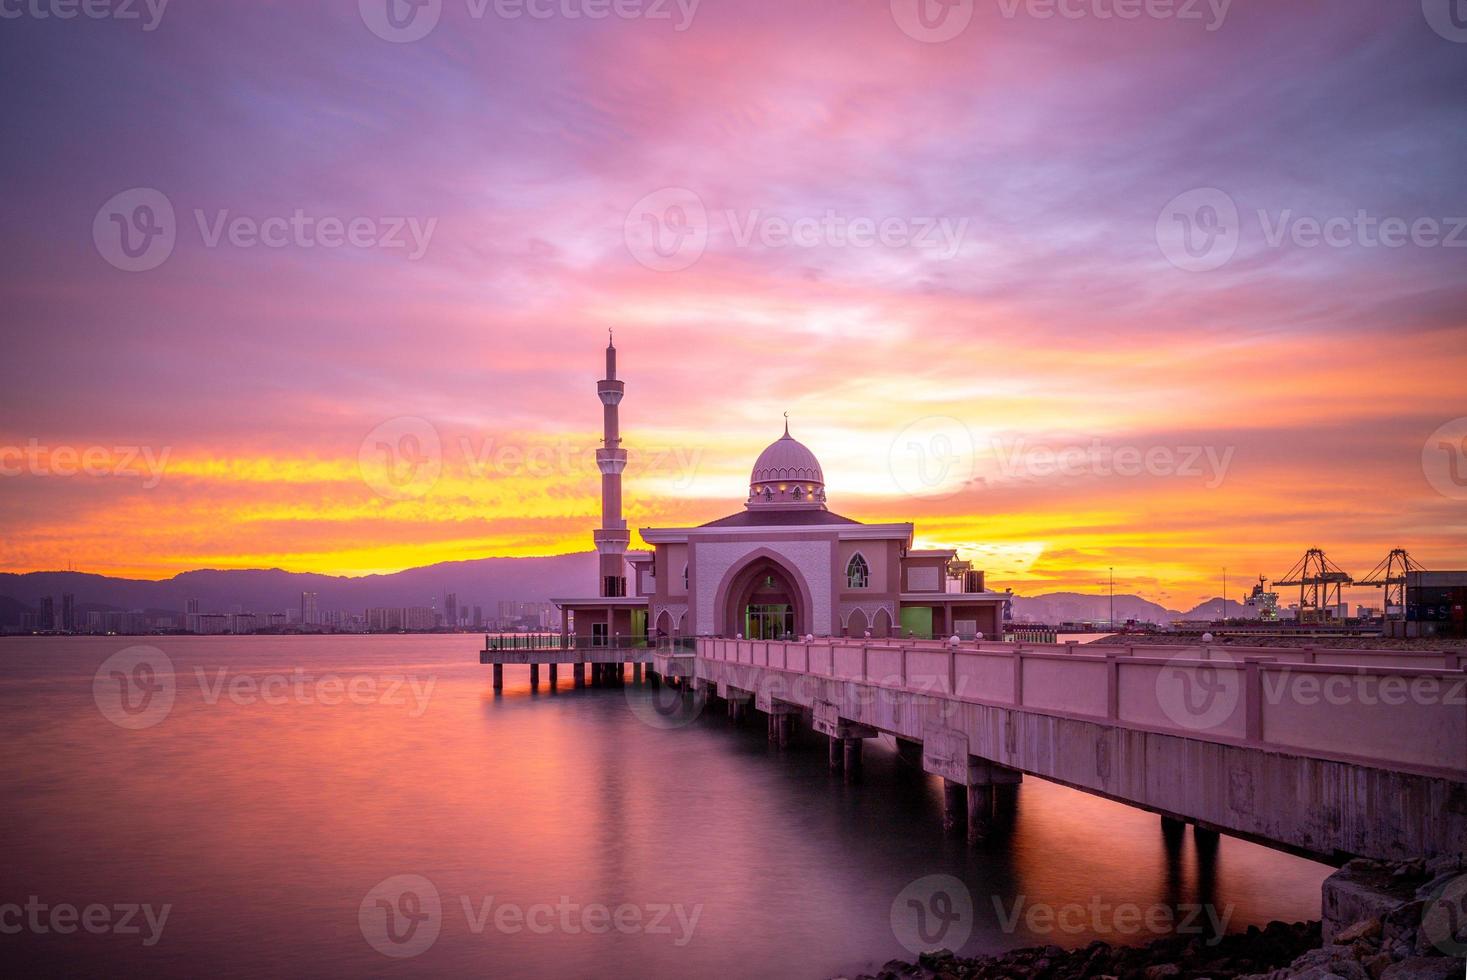 Butterworth Floating Mosque Masjid Terapung at dusk photo